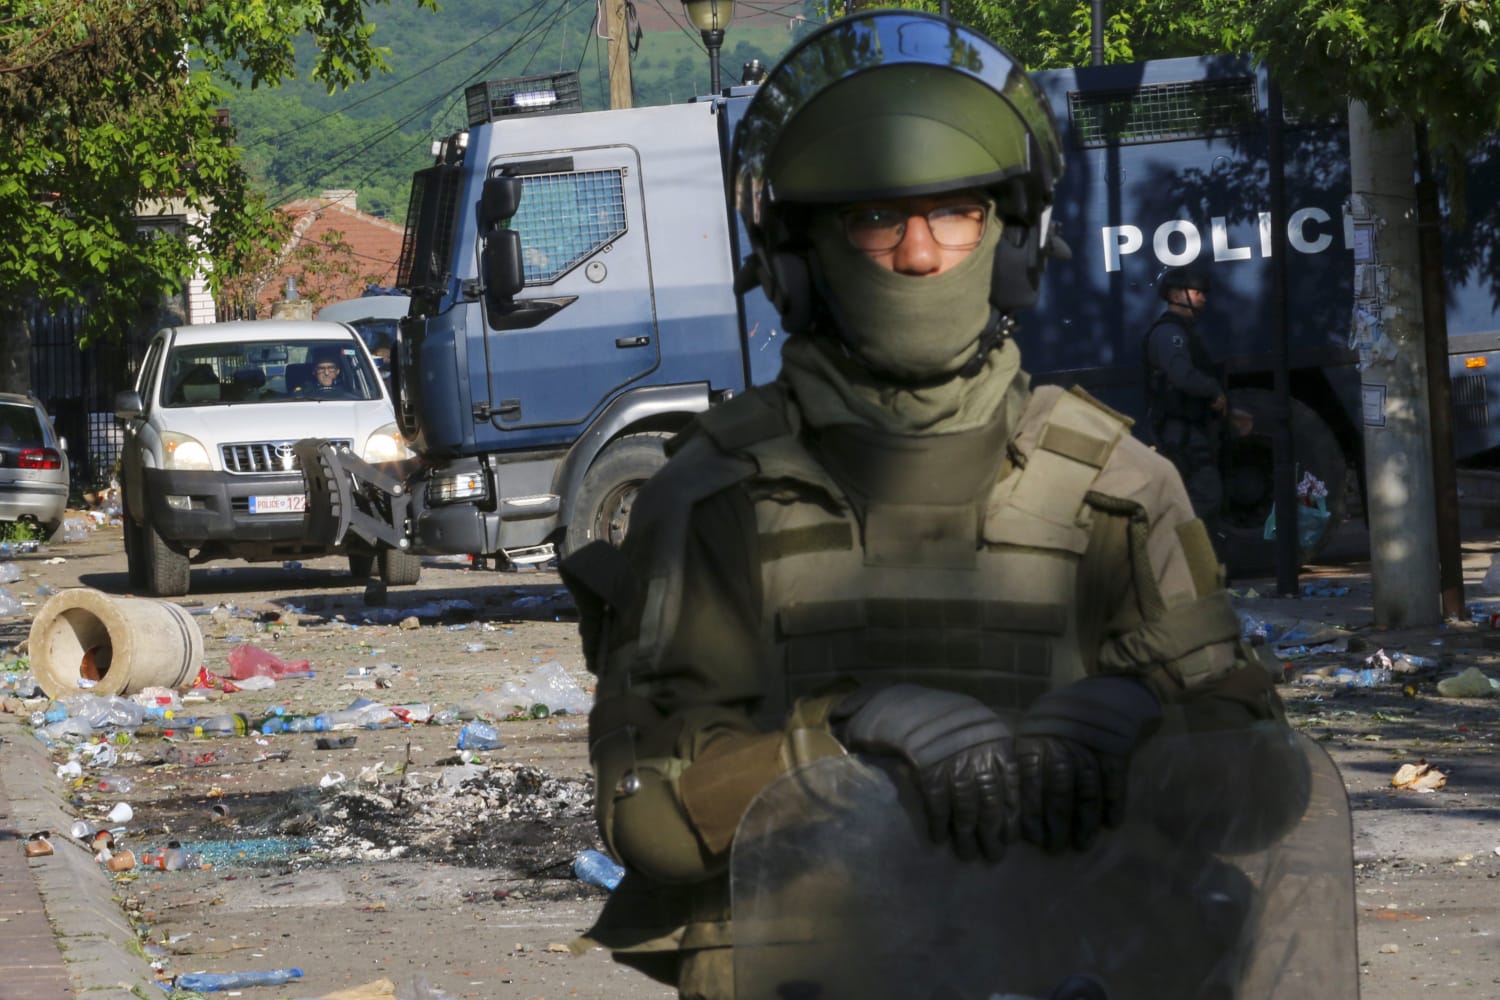 30 international peacekeepers injured in fierce clashes with ethnic Serbs in Kosovo